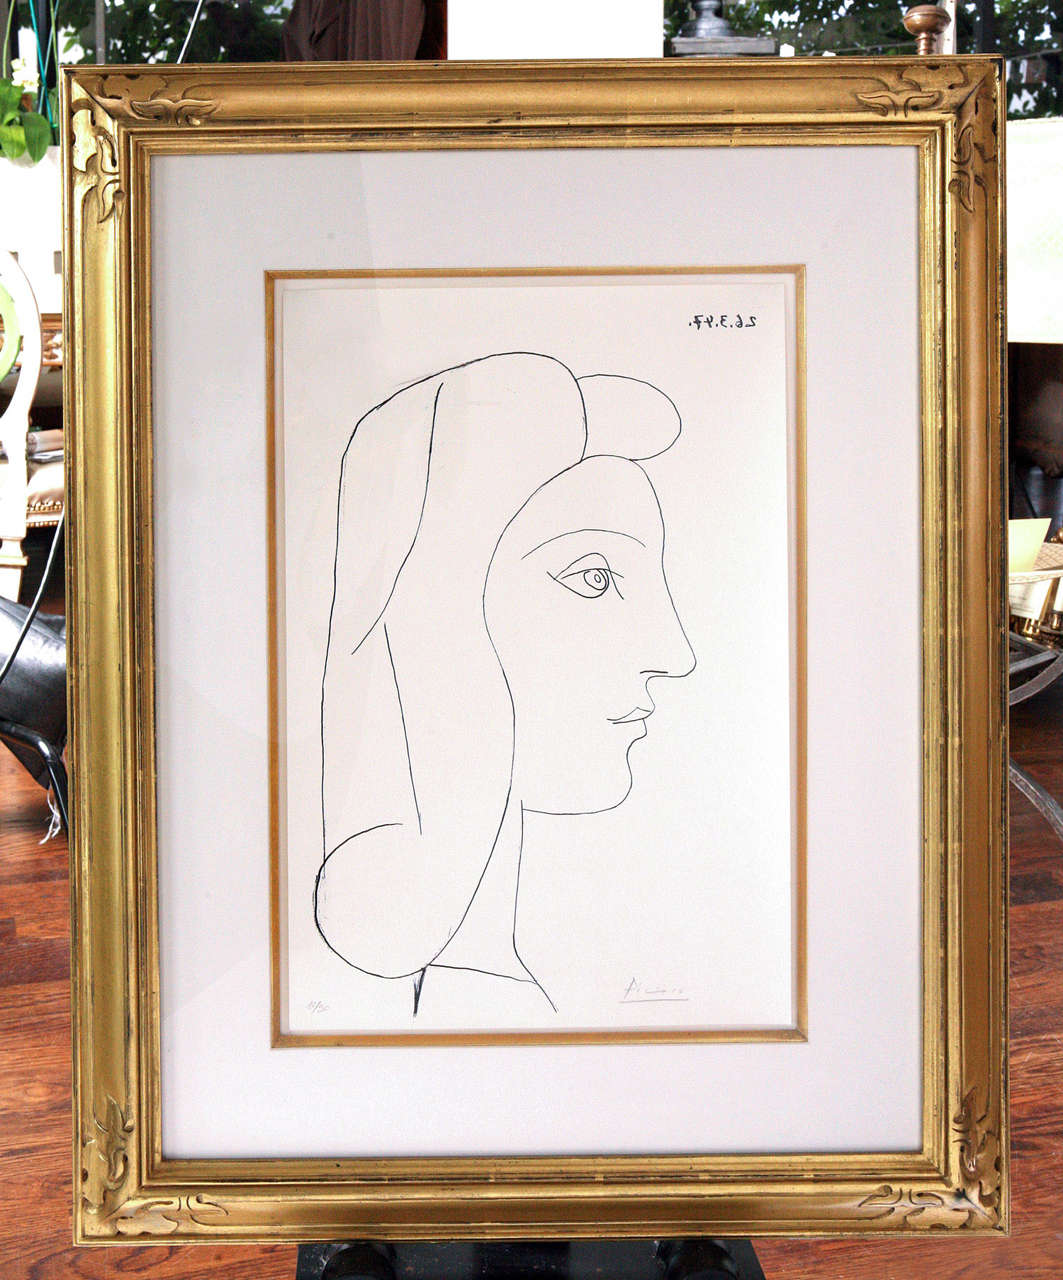 Picasso lithograph of Francoise, [Profil de Femme] 1947.  Signed, lower right, in pencil.  Hinged in frame.  Gilt frame.  Image size: 15